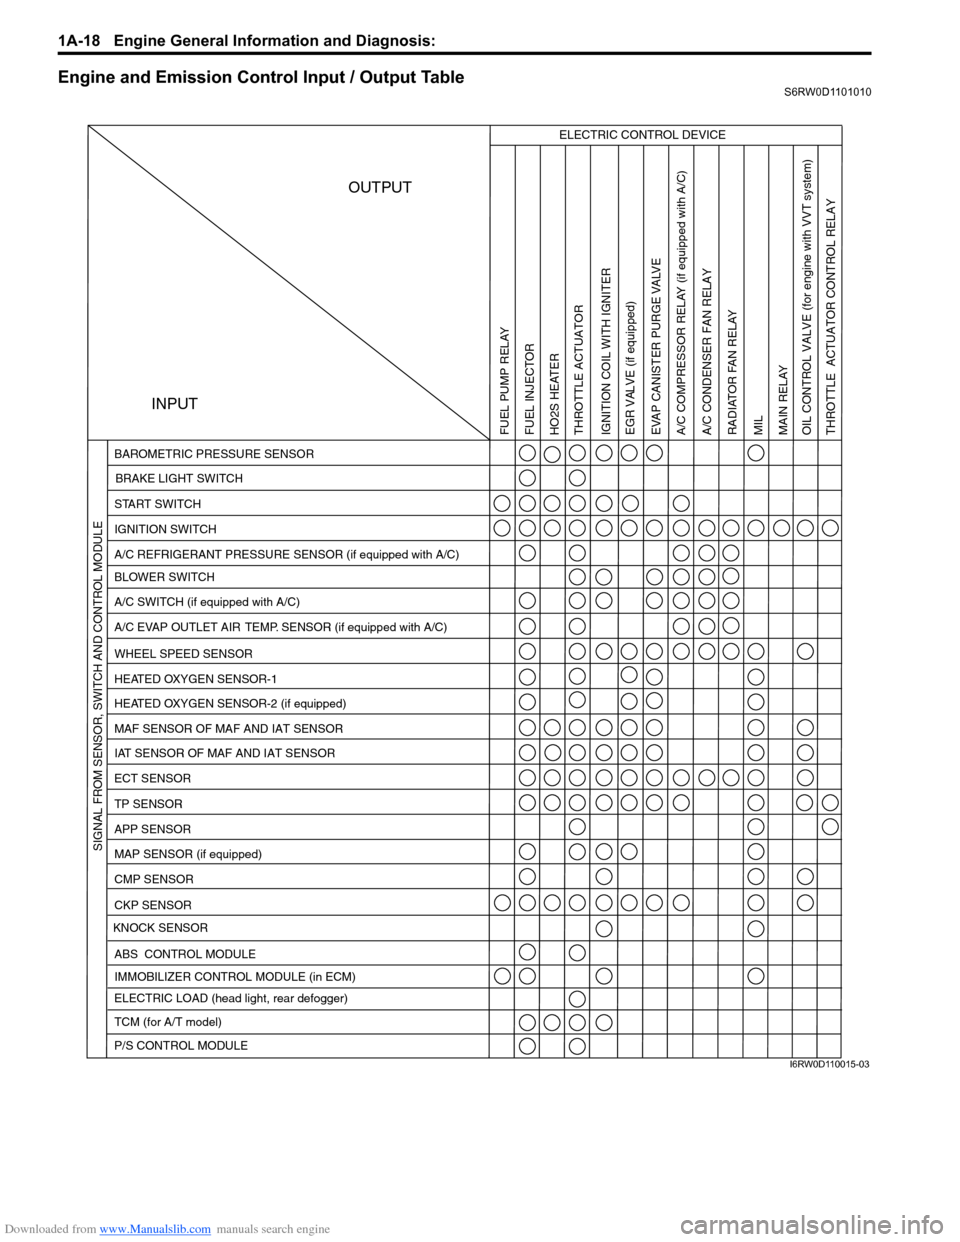 SUZUKI SX4 2006 1.G Service Workshop Manual Downloaded from www.Manualslib.com manuals search engine 1A-18 Engine General Information and Diagnosis: 
Engine and Emission Control Input / Output TableS6RW0D1101010
INPUTOUTPUT
ELECTRIC CONTROL DEV